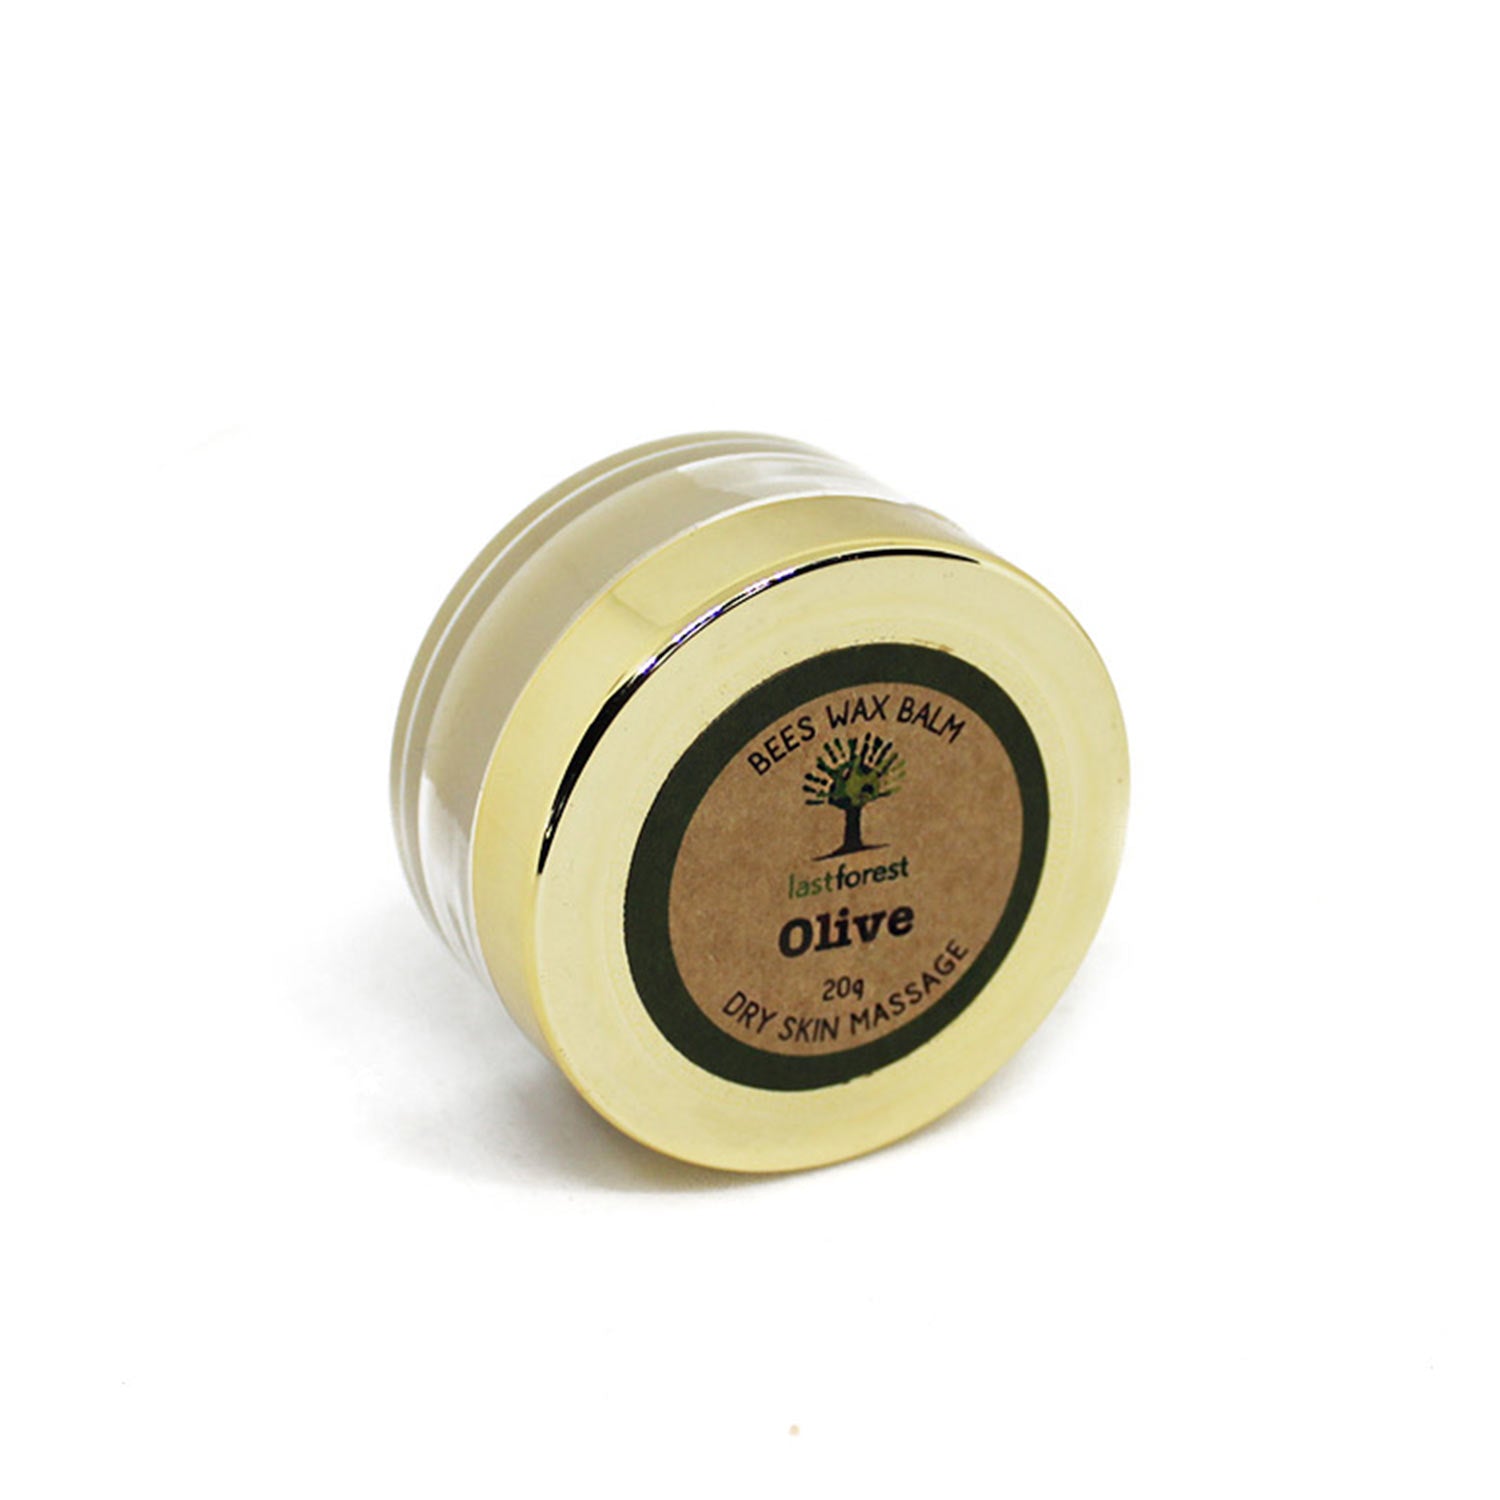 Last Forest Olive Balm for Soft and Smooth Skin 20g